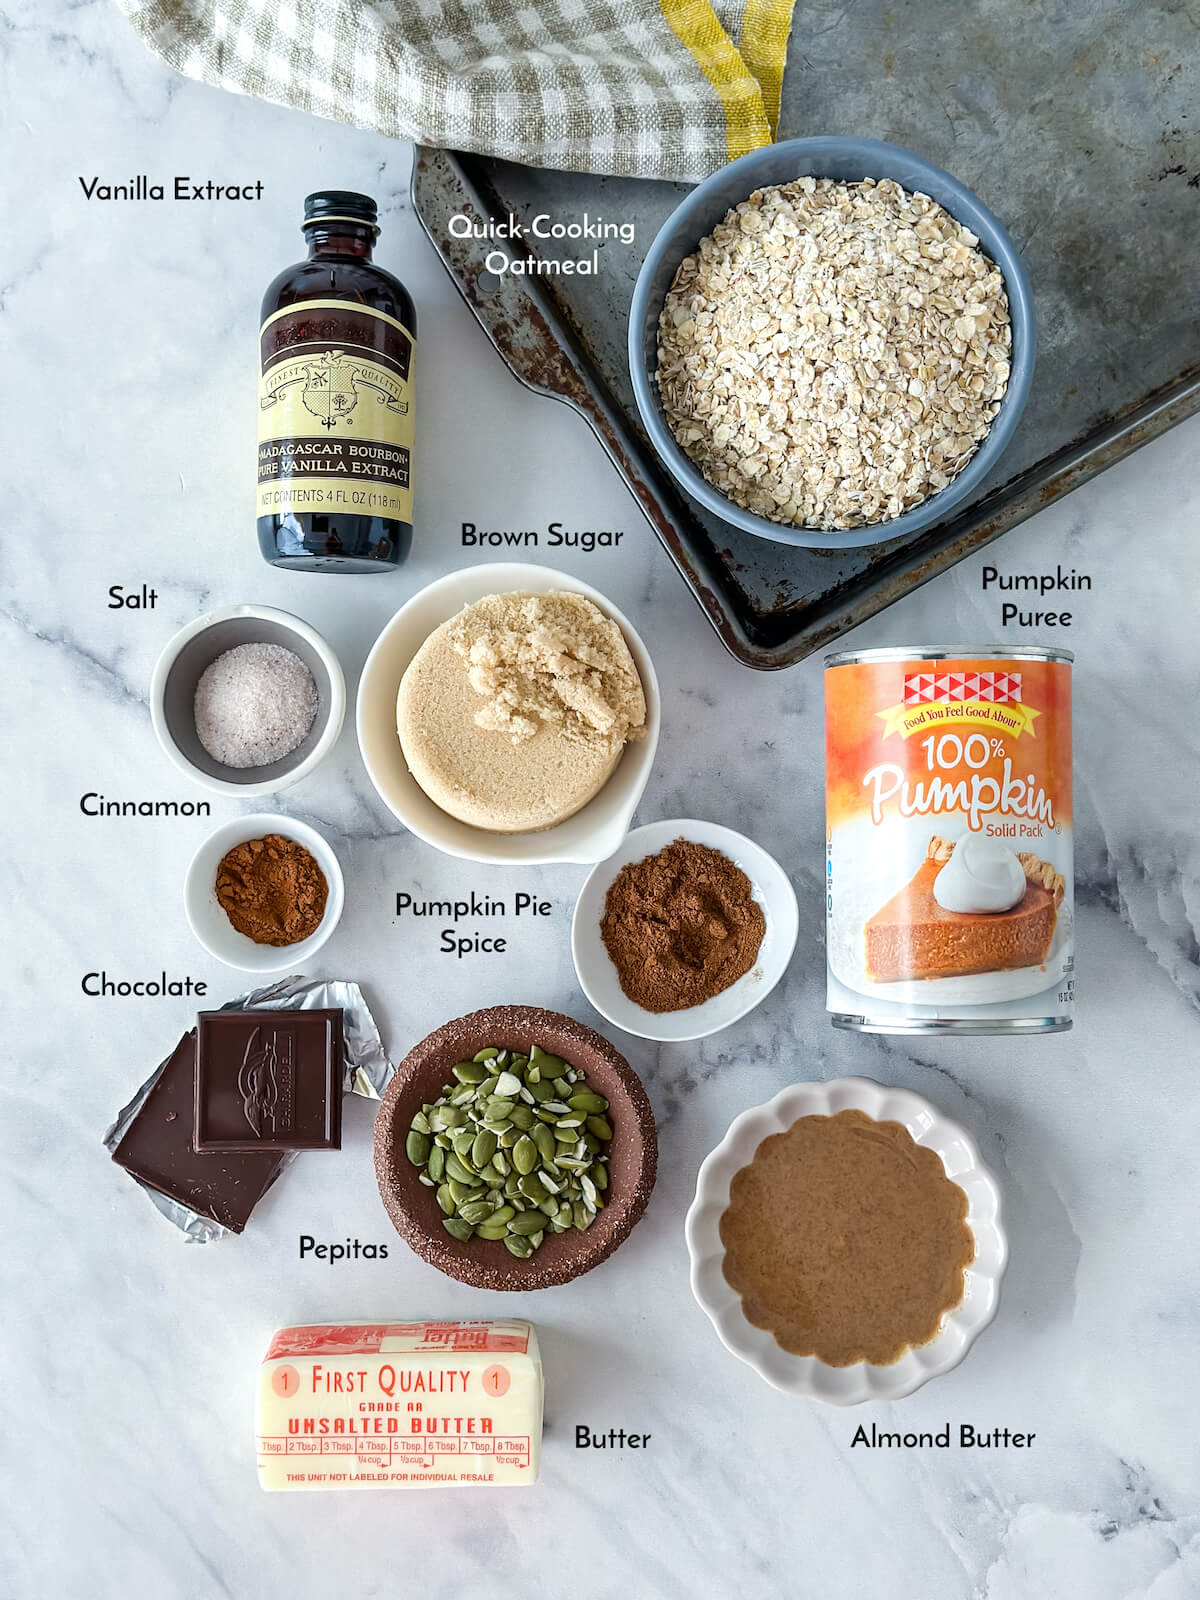 Ingredients for no bake pumpkin cookies on a marble surface including: vanilla, quick-cooking oatmeal, brown sugar, pumpkin puree, salt, cinnamon, chocolate, pumpkin pie spice, pepitas, butter and almond butter.